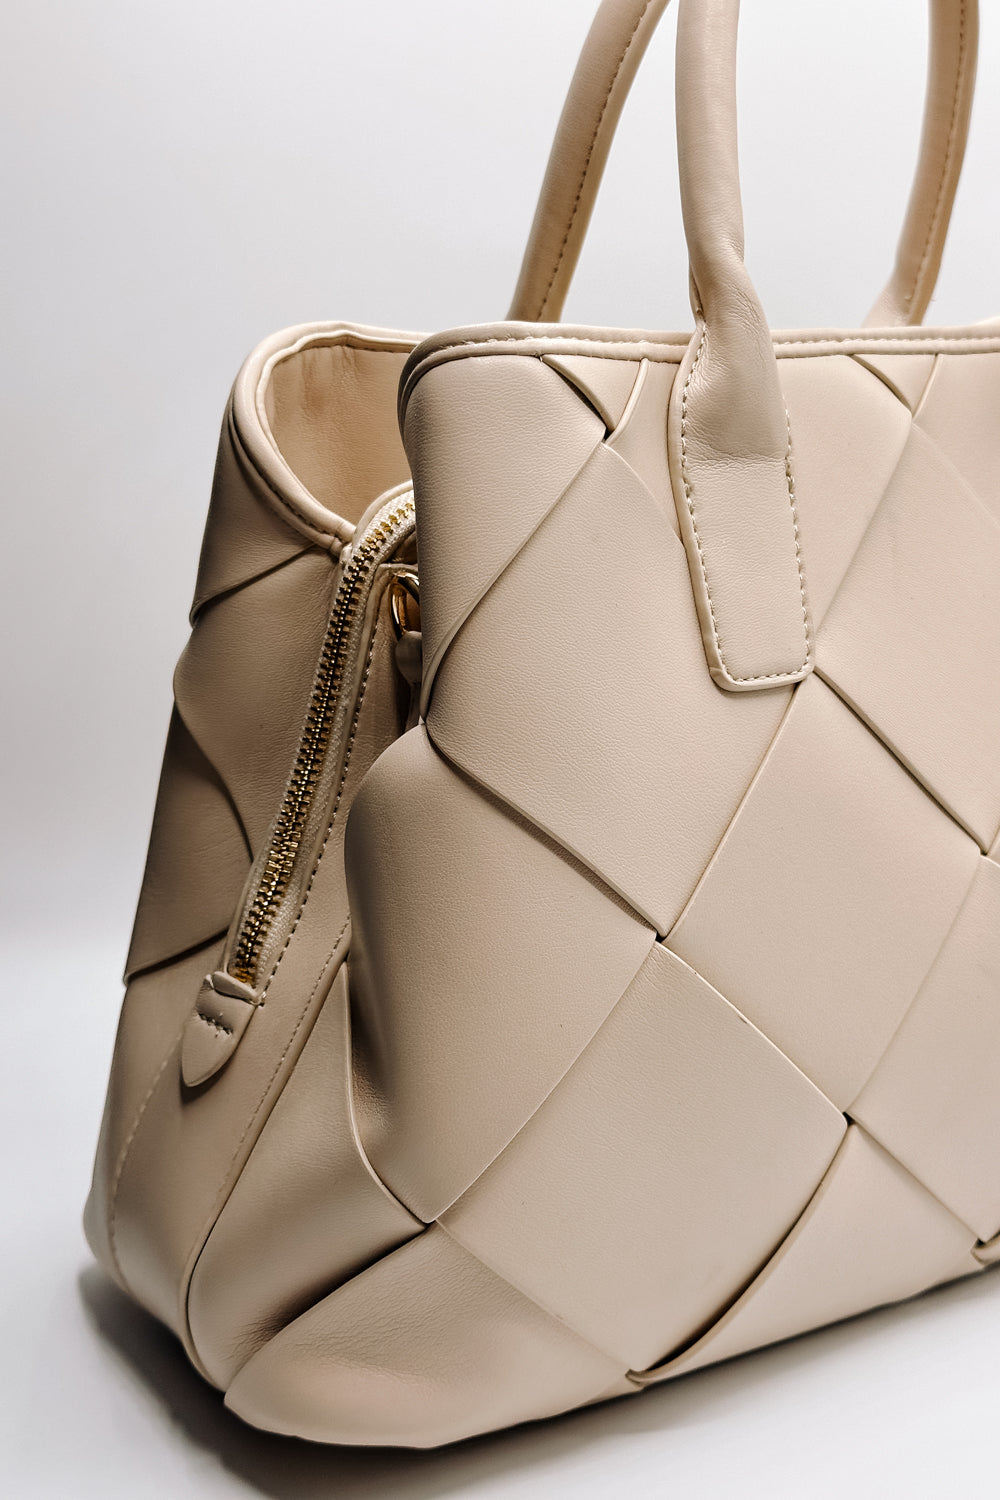 Close up side view of the Phoebe Cream Woven Leather Purse which features cream leather fabric, woven pattern details, gold hardware, monochrome straps, zipper closure and gold clasp closure